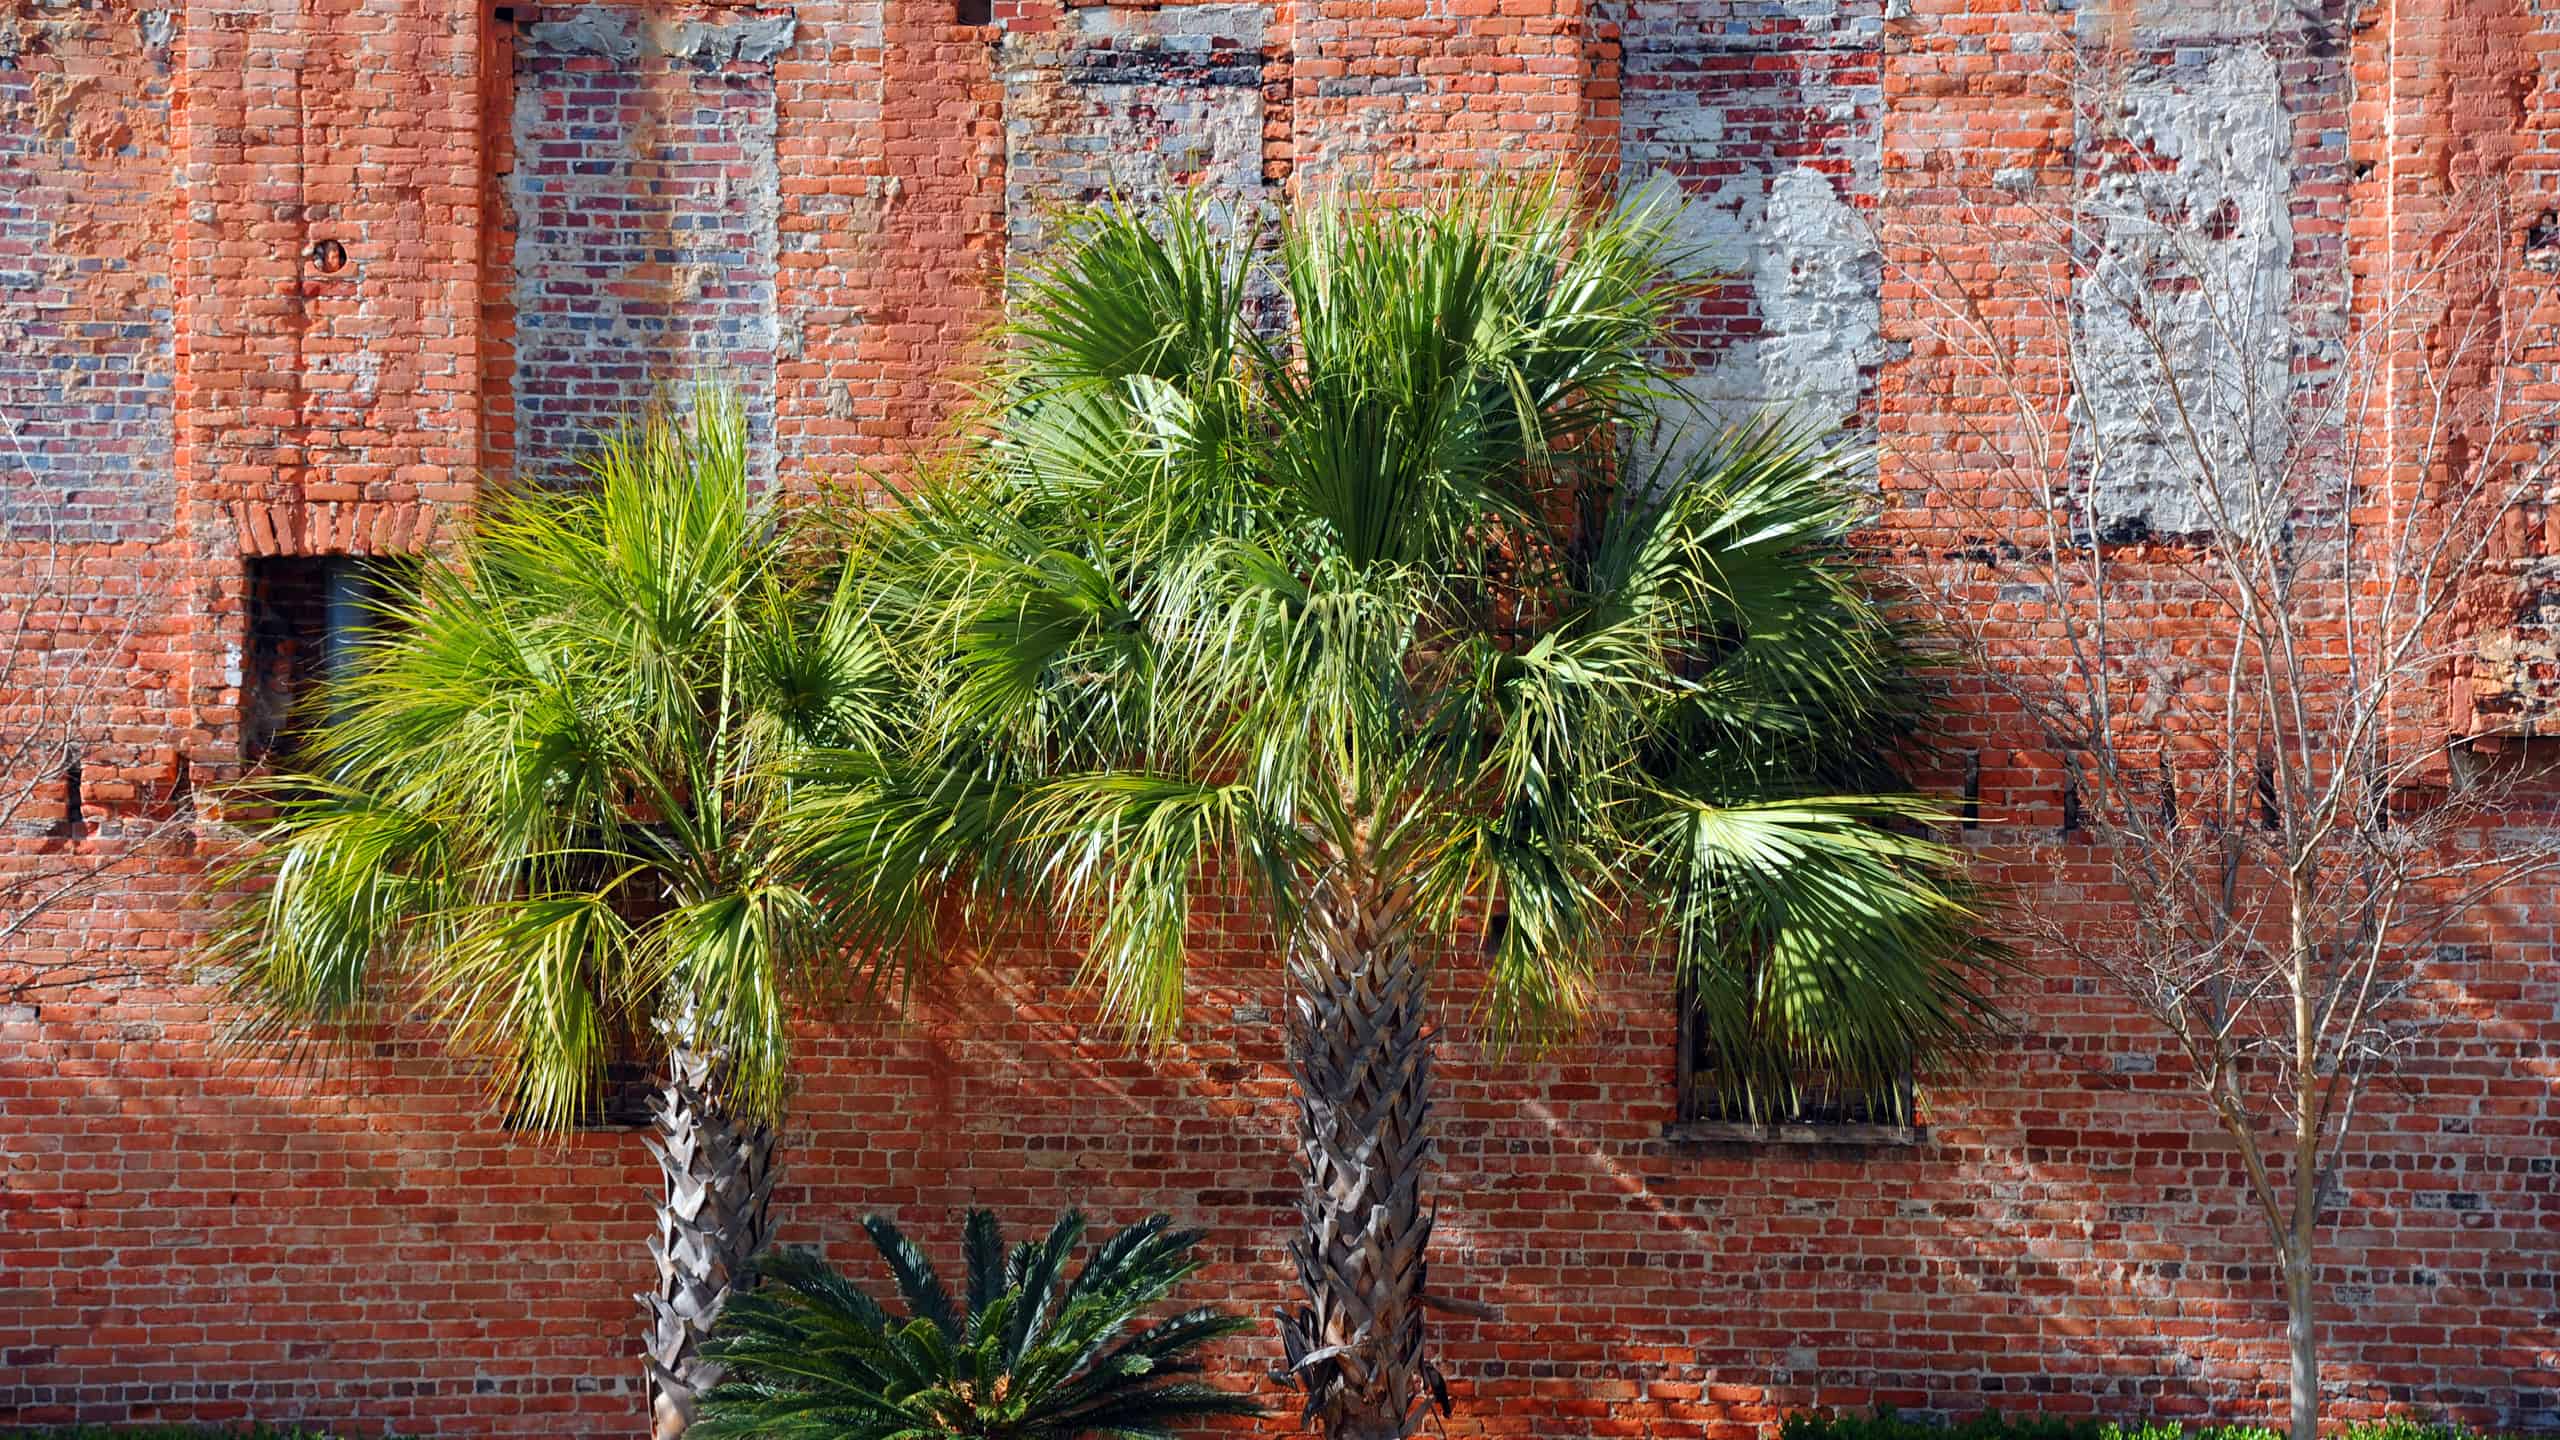 Two palm trees growing outside of a brick building in Columbia, South Carolina.